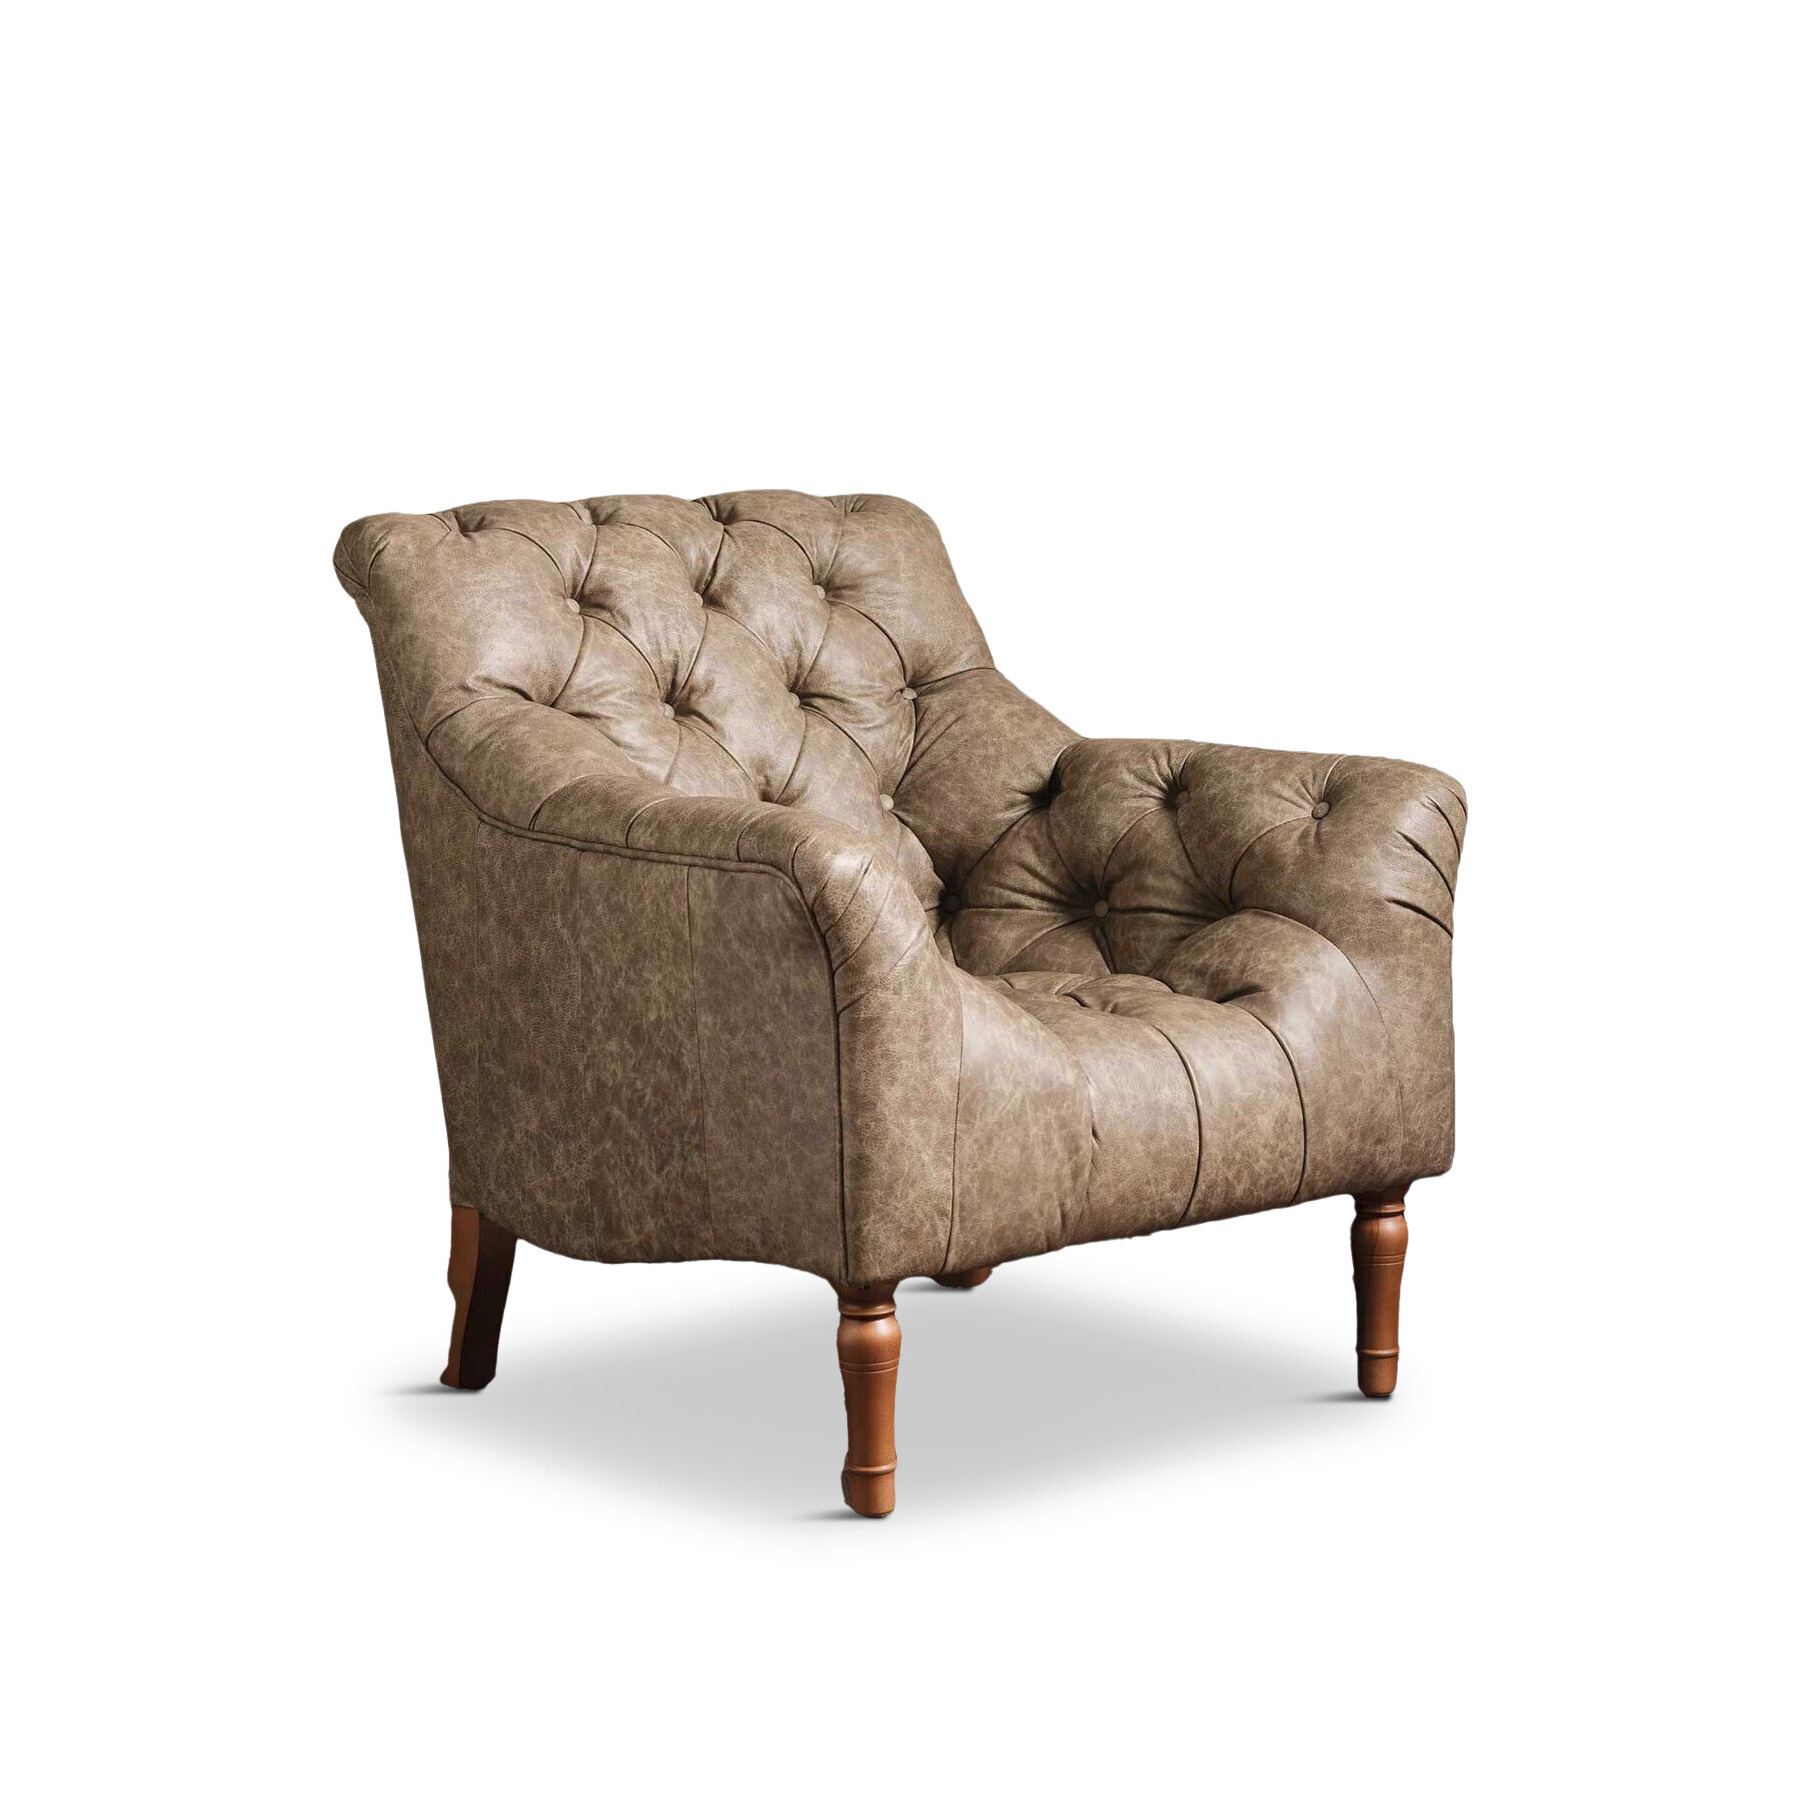 Barker and Stonehouse Forman Brown Leather Armchair - image 1